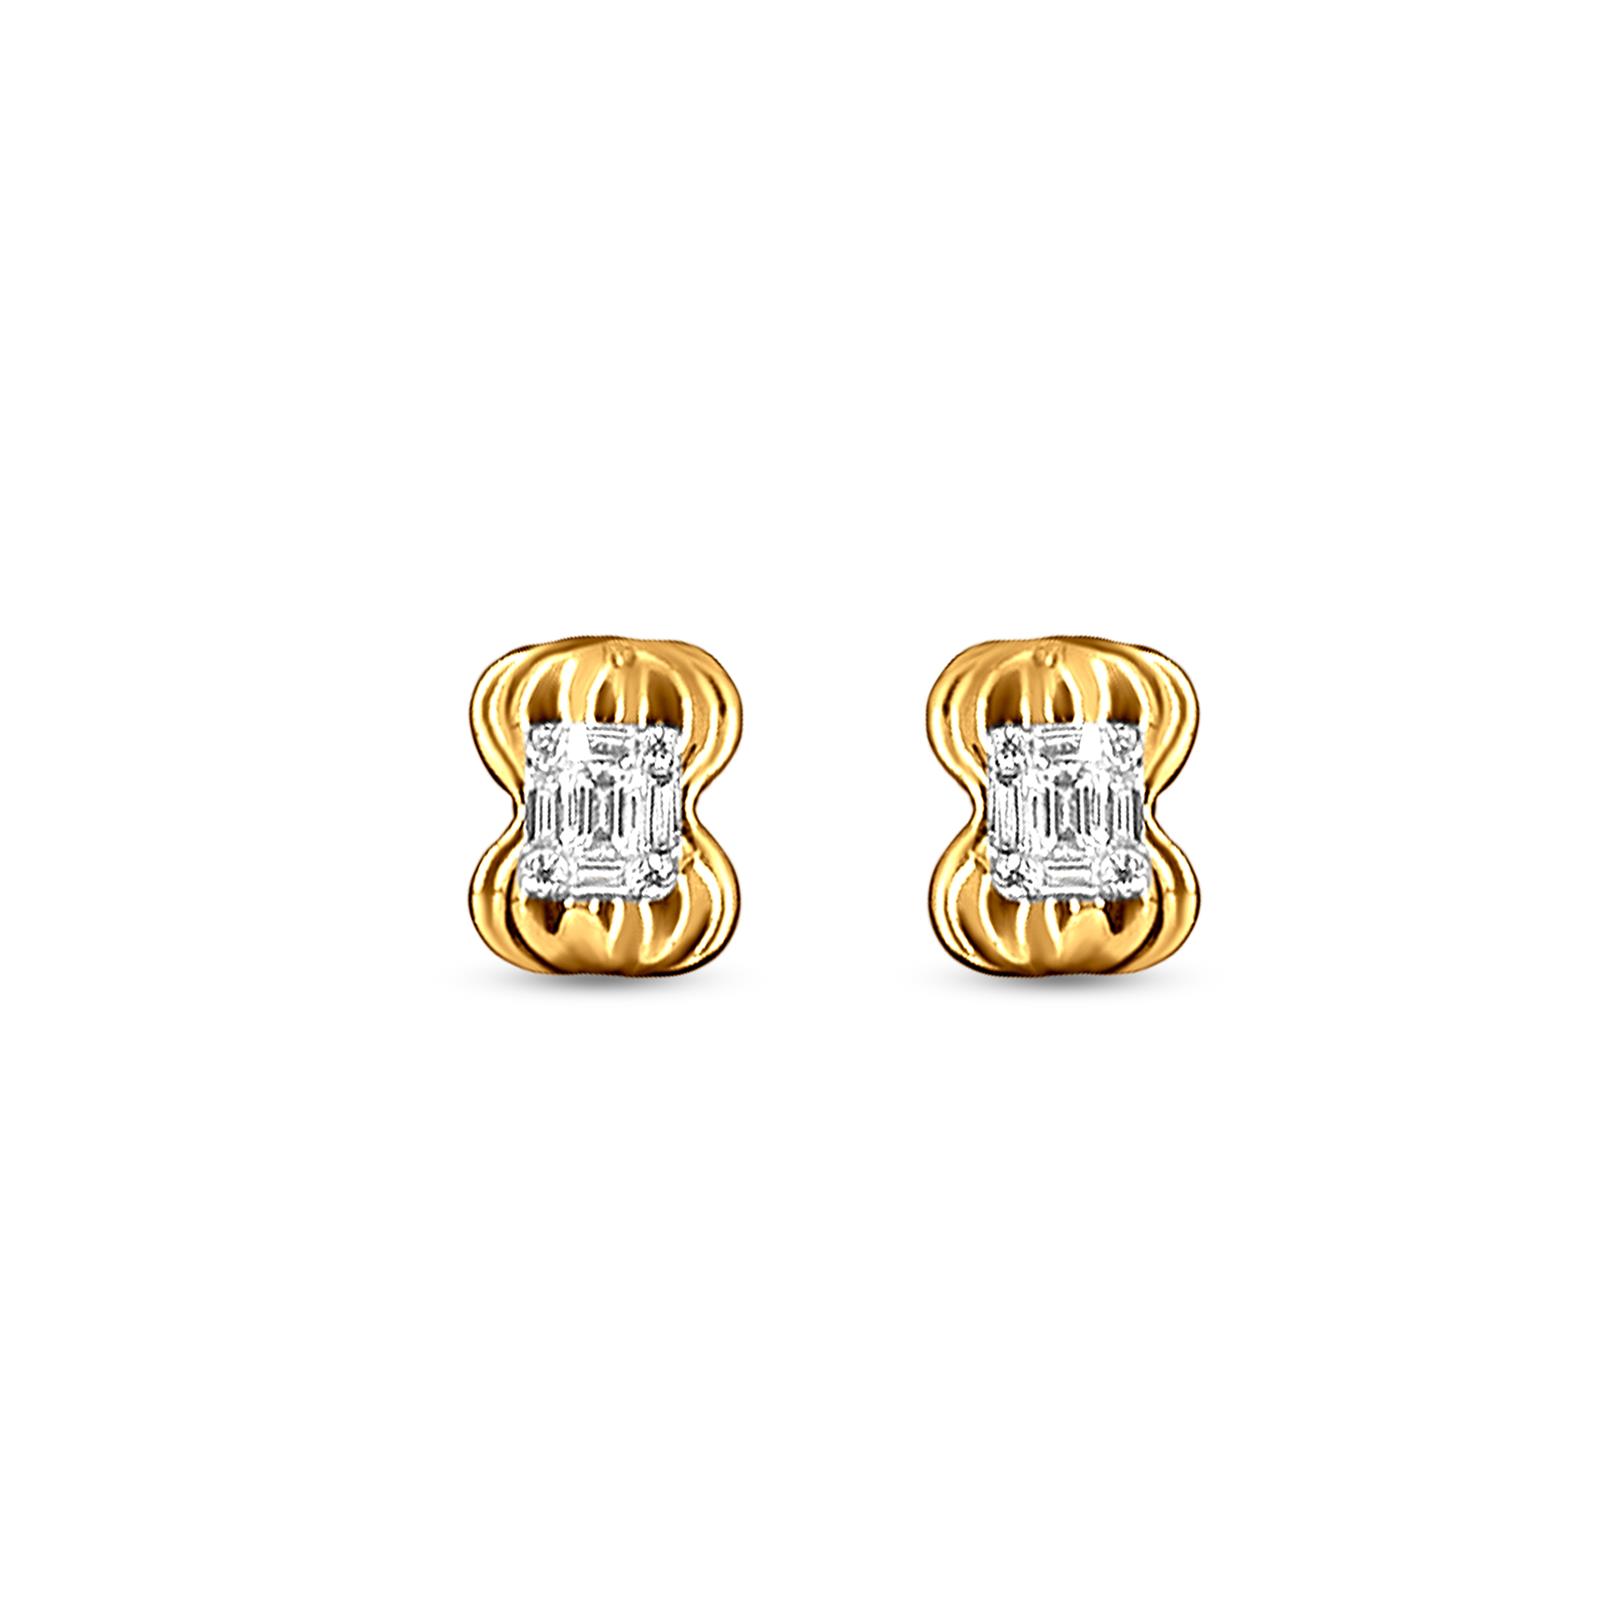 Crossover Stud Earrings in Sterling Silver with 18K Yellow Gold  David  Yurman